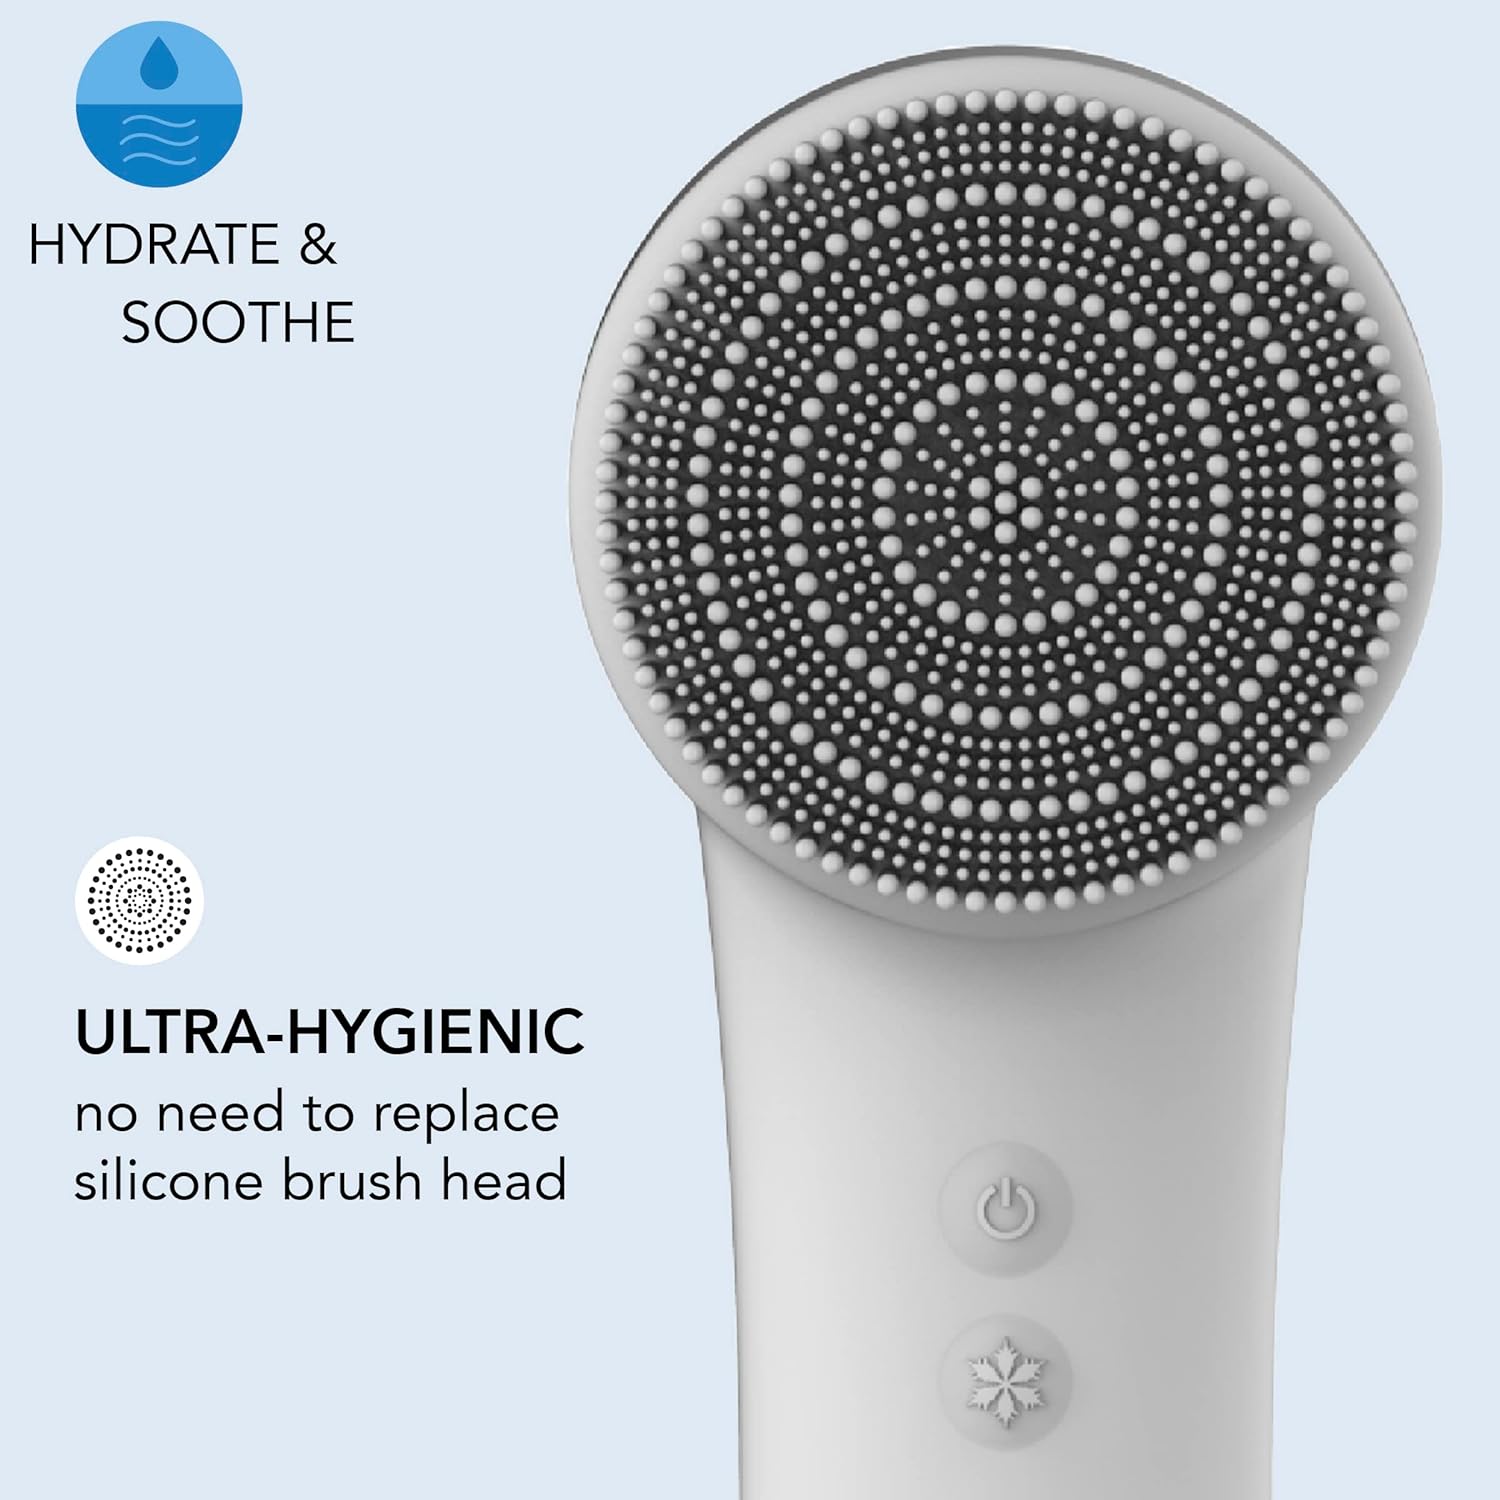 skn by conair Cryotherapy Advanced Facial Cleansing Brush, Featuring Ultra-Hygienic Silicone Brush Head and Cool Plate to Help Soothe Inflammation and Reduce Puffiness